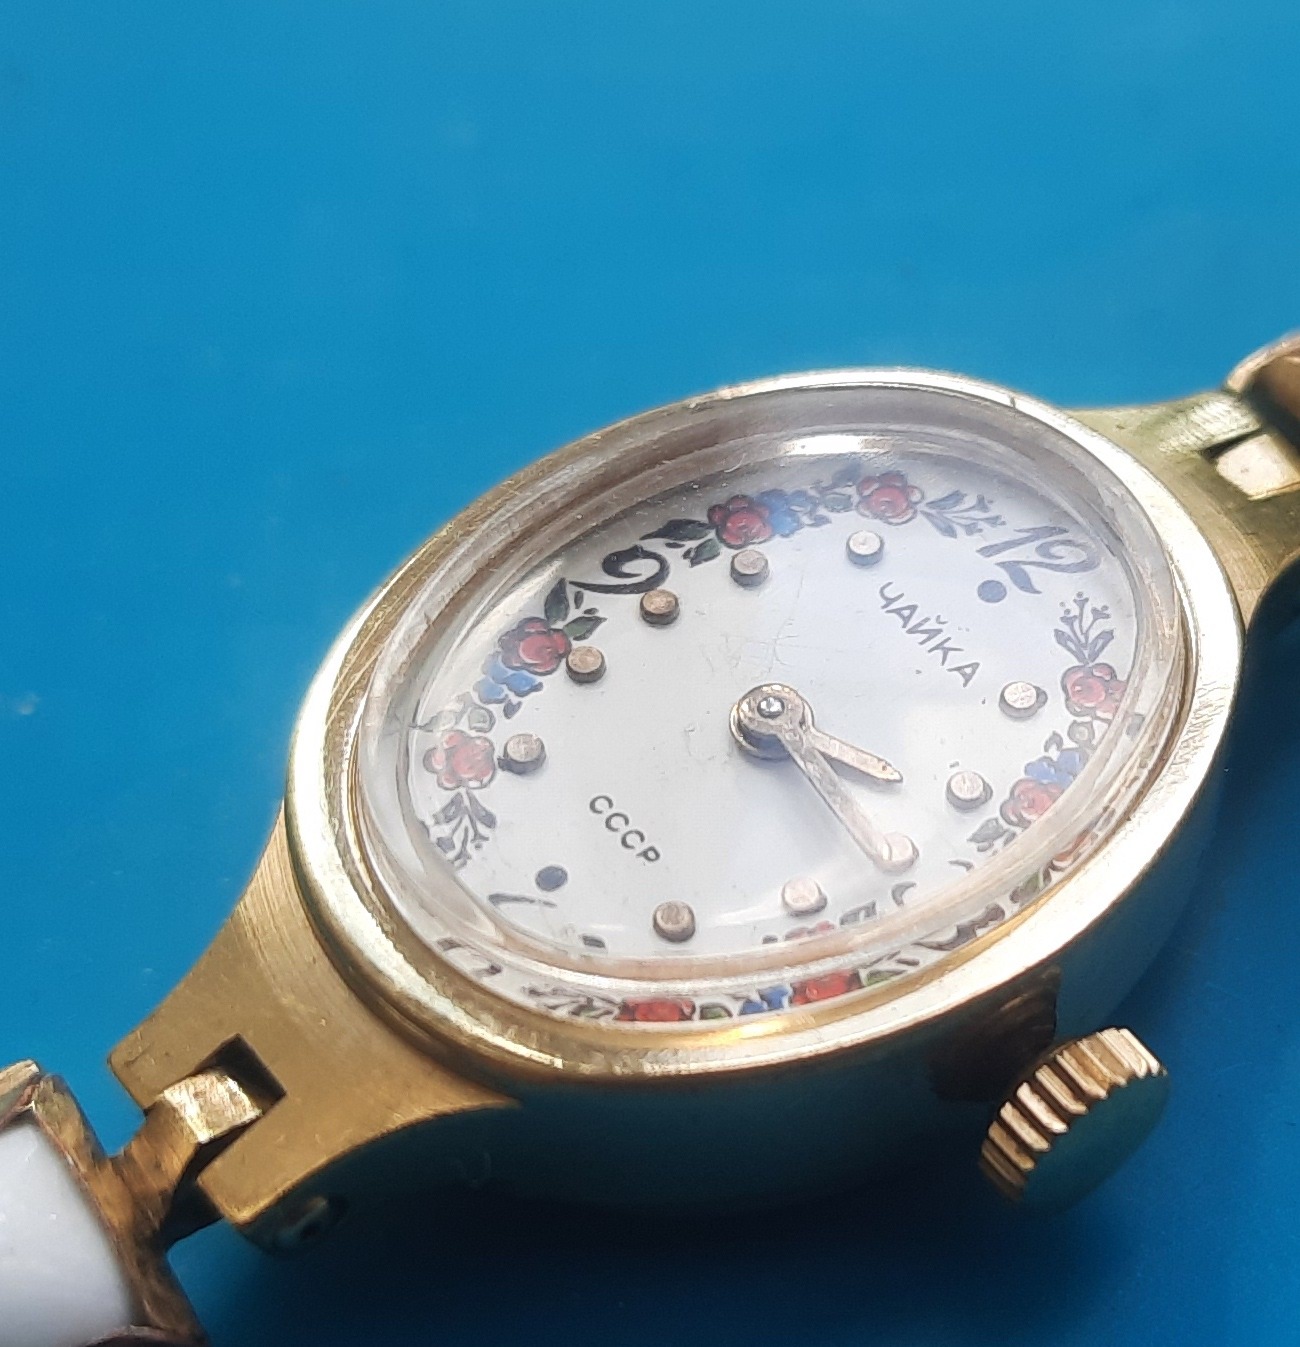 Is it possible to re-take off the women's watch Seagull? - My, Repair, Wrist Watch, Hobby, Moscow, Restoration, Video, Longpost, Rukozhop, Women's Watches